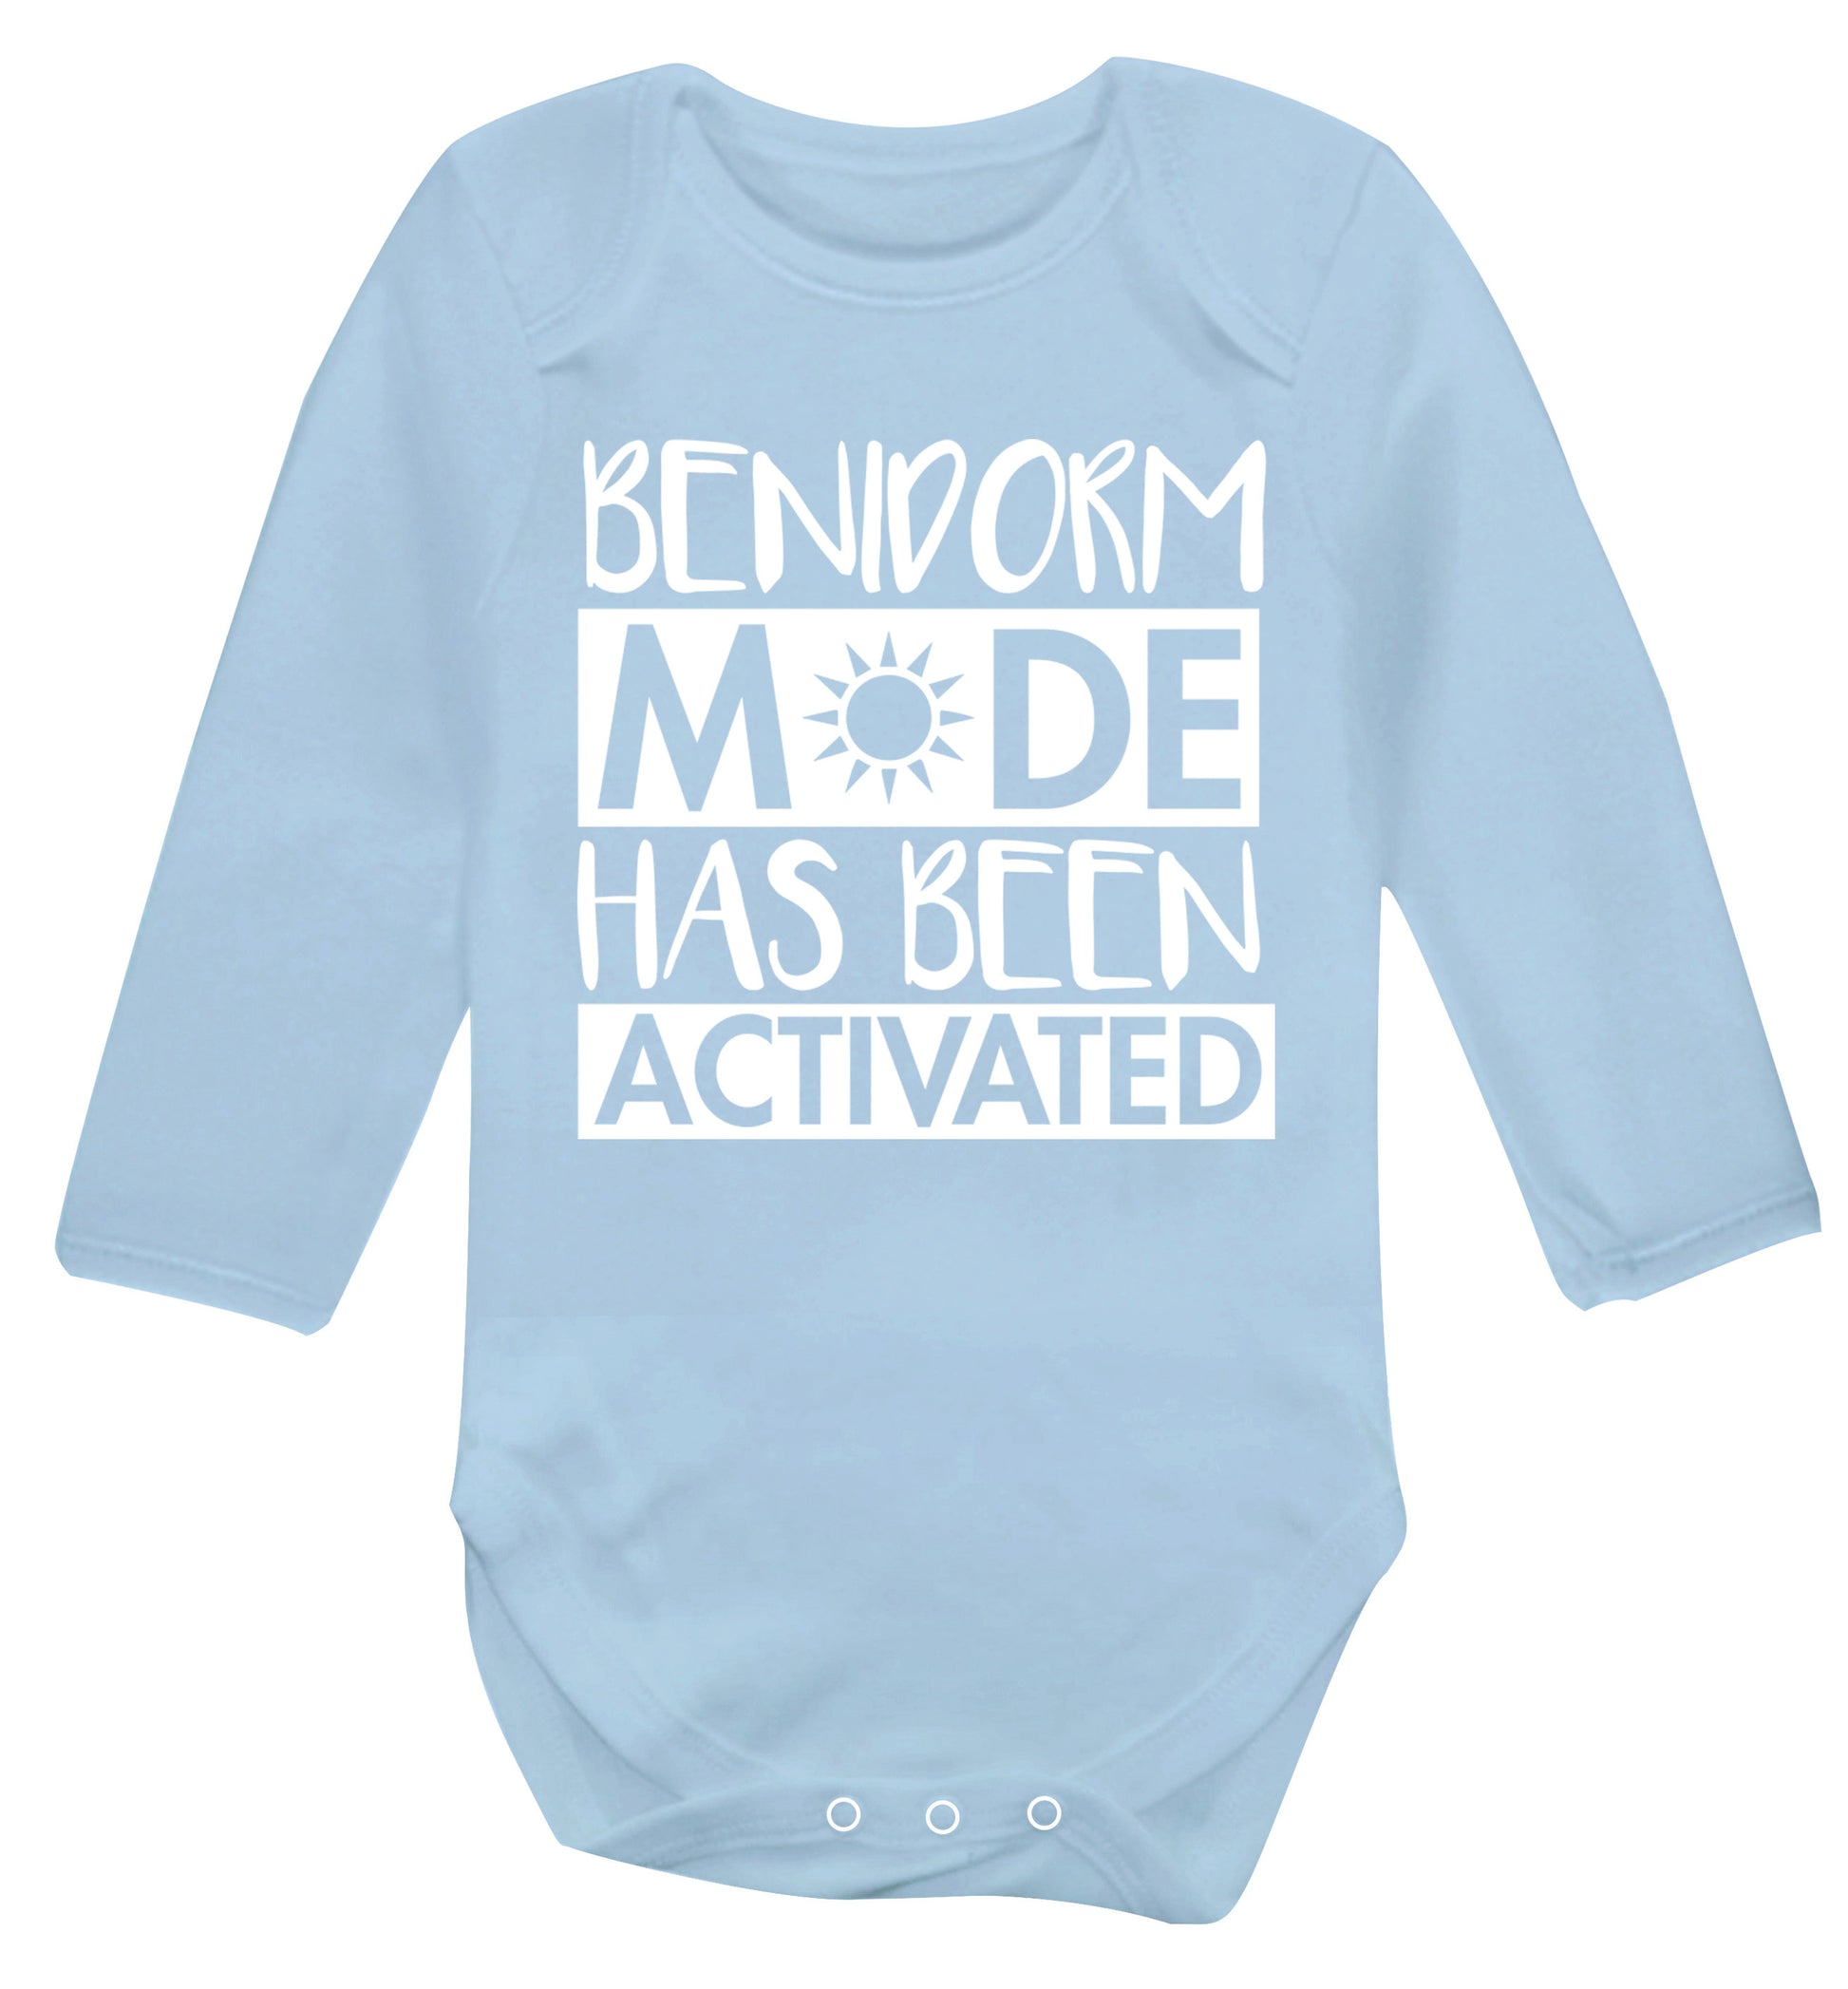 Benidorm mode has been activated Baby Vest long sleeved pale blue 6-12 months